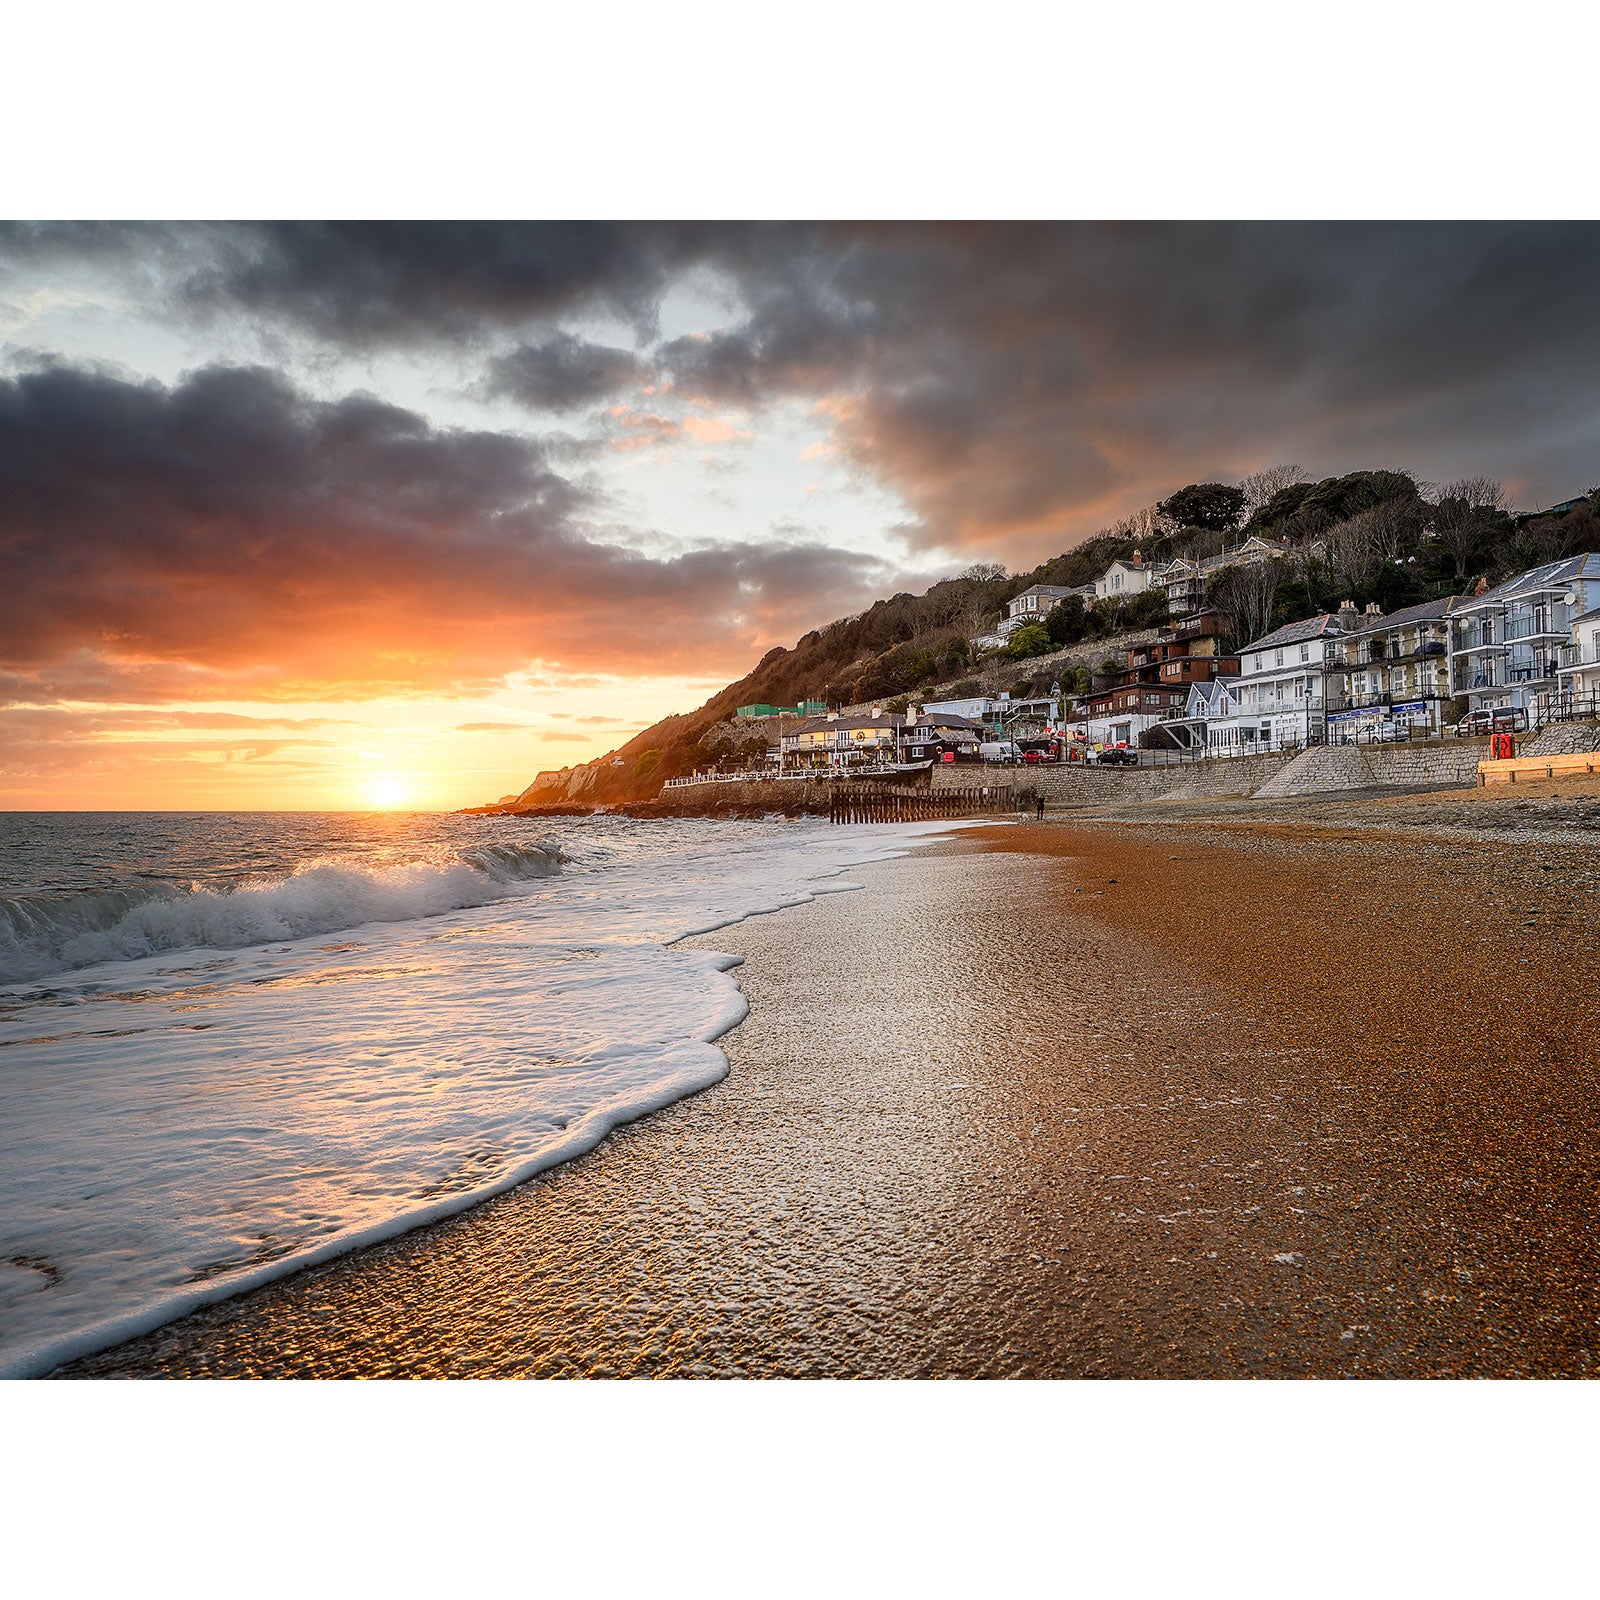 Golden sunset over a pebble beach with waves gently lapping the shore and houses nestled on a hillside on the Isle of Ventnor by Available Light Photography.